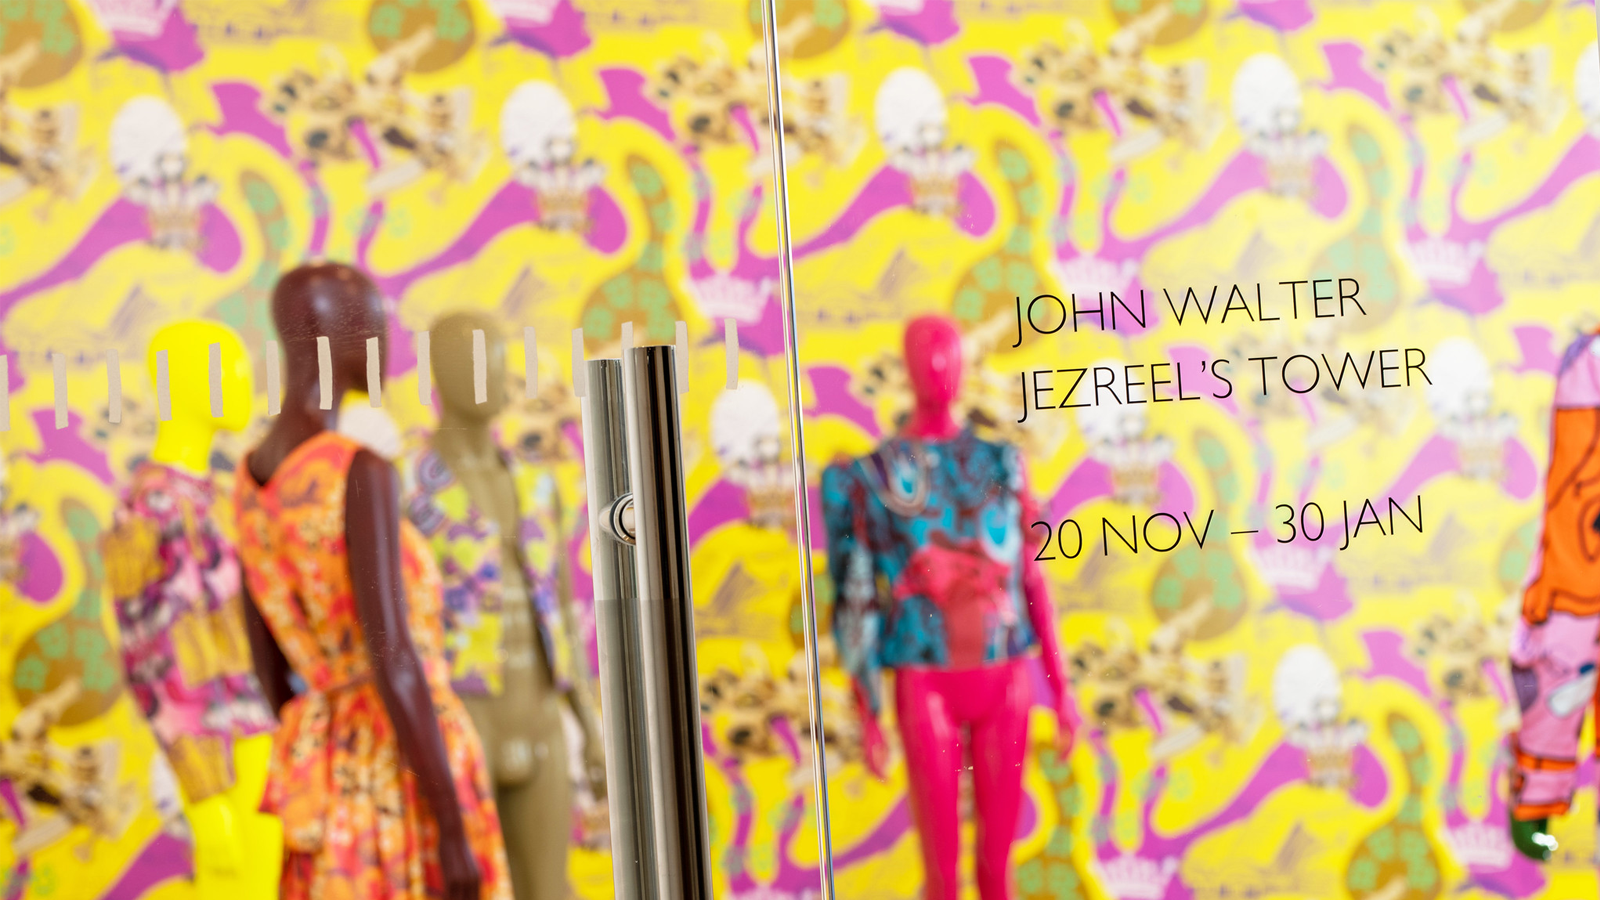 An installation shot of an exhibition which contains bright pink and yellow wallpaper, with mannequins dressed in colourful clothing